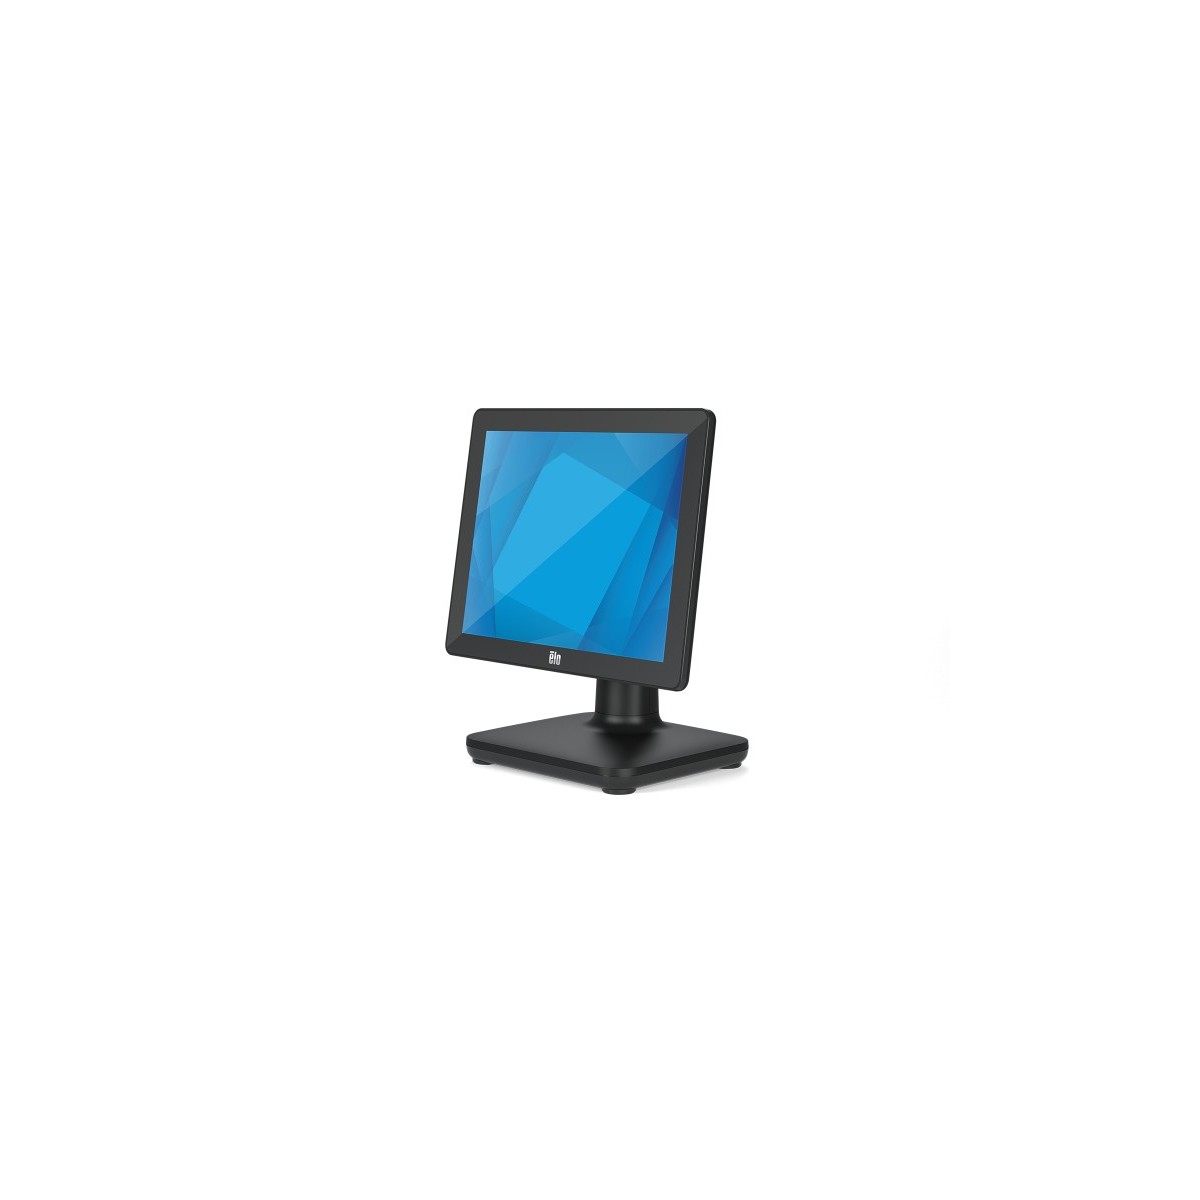 Elo Touch Solutions Elo Touch Solution E931896 - 38.1 cm (15") - 1024 x 768 pixels - LCD - 340 cd/m² - Projected capacitive syst